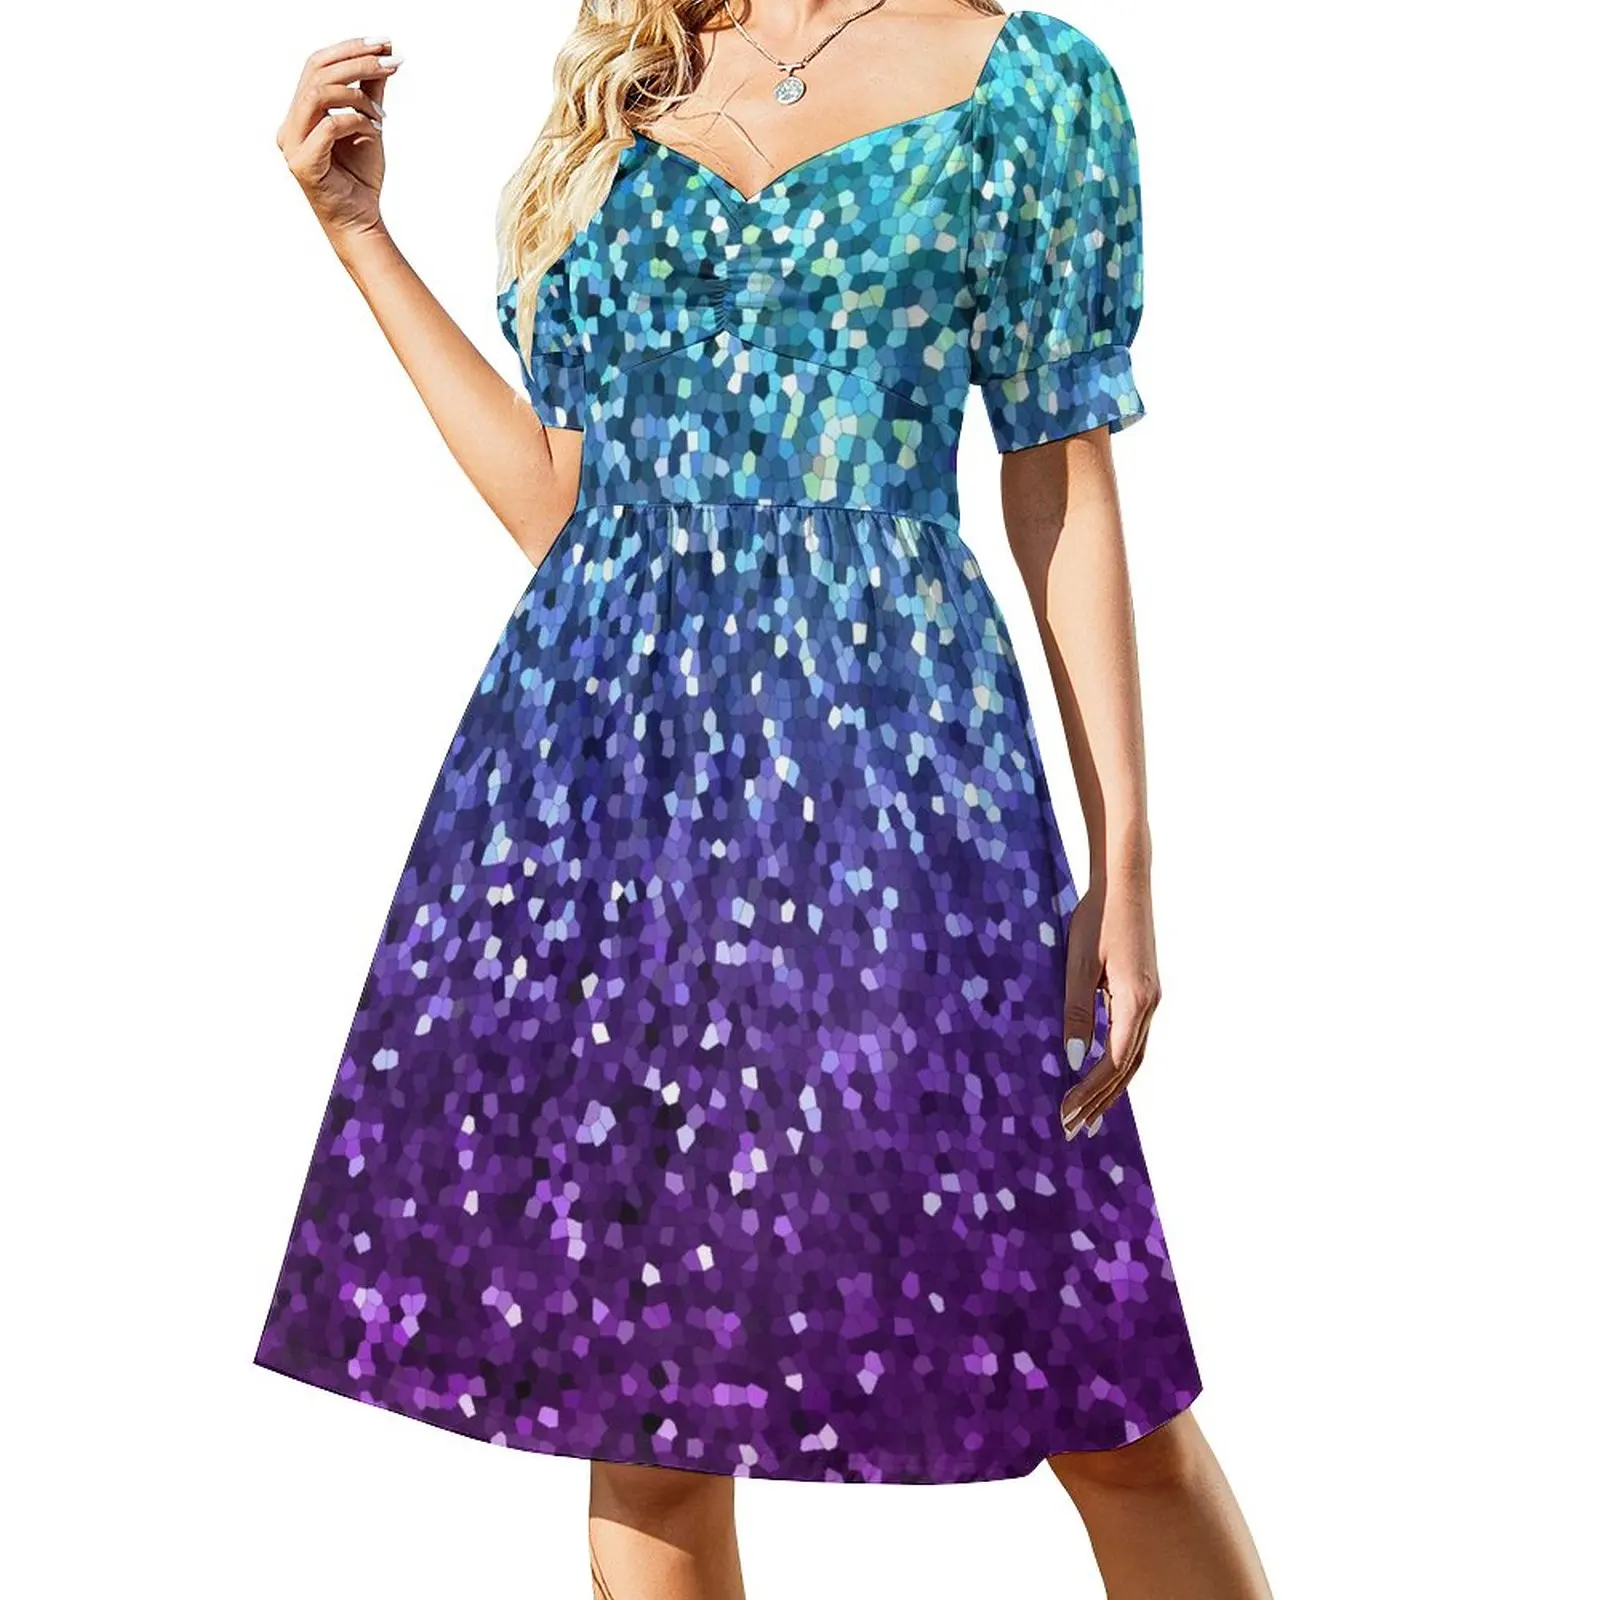 

Graphic Mosaic Sparkley Texture G198 Dress Woman clothes Clothing female